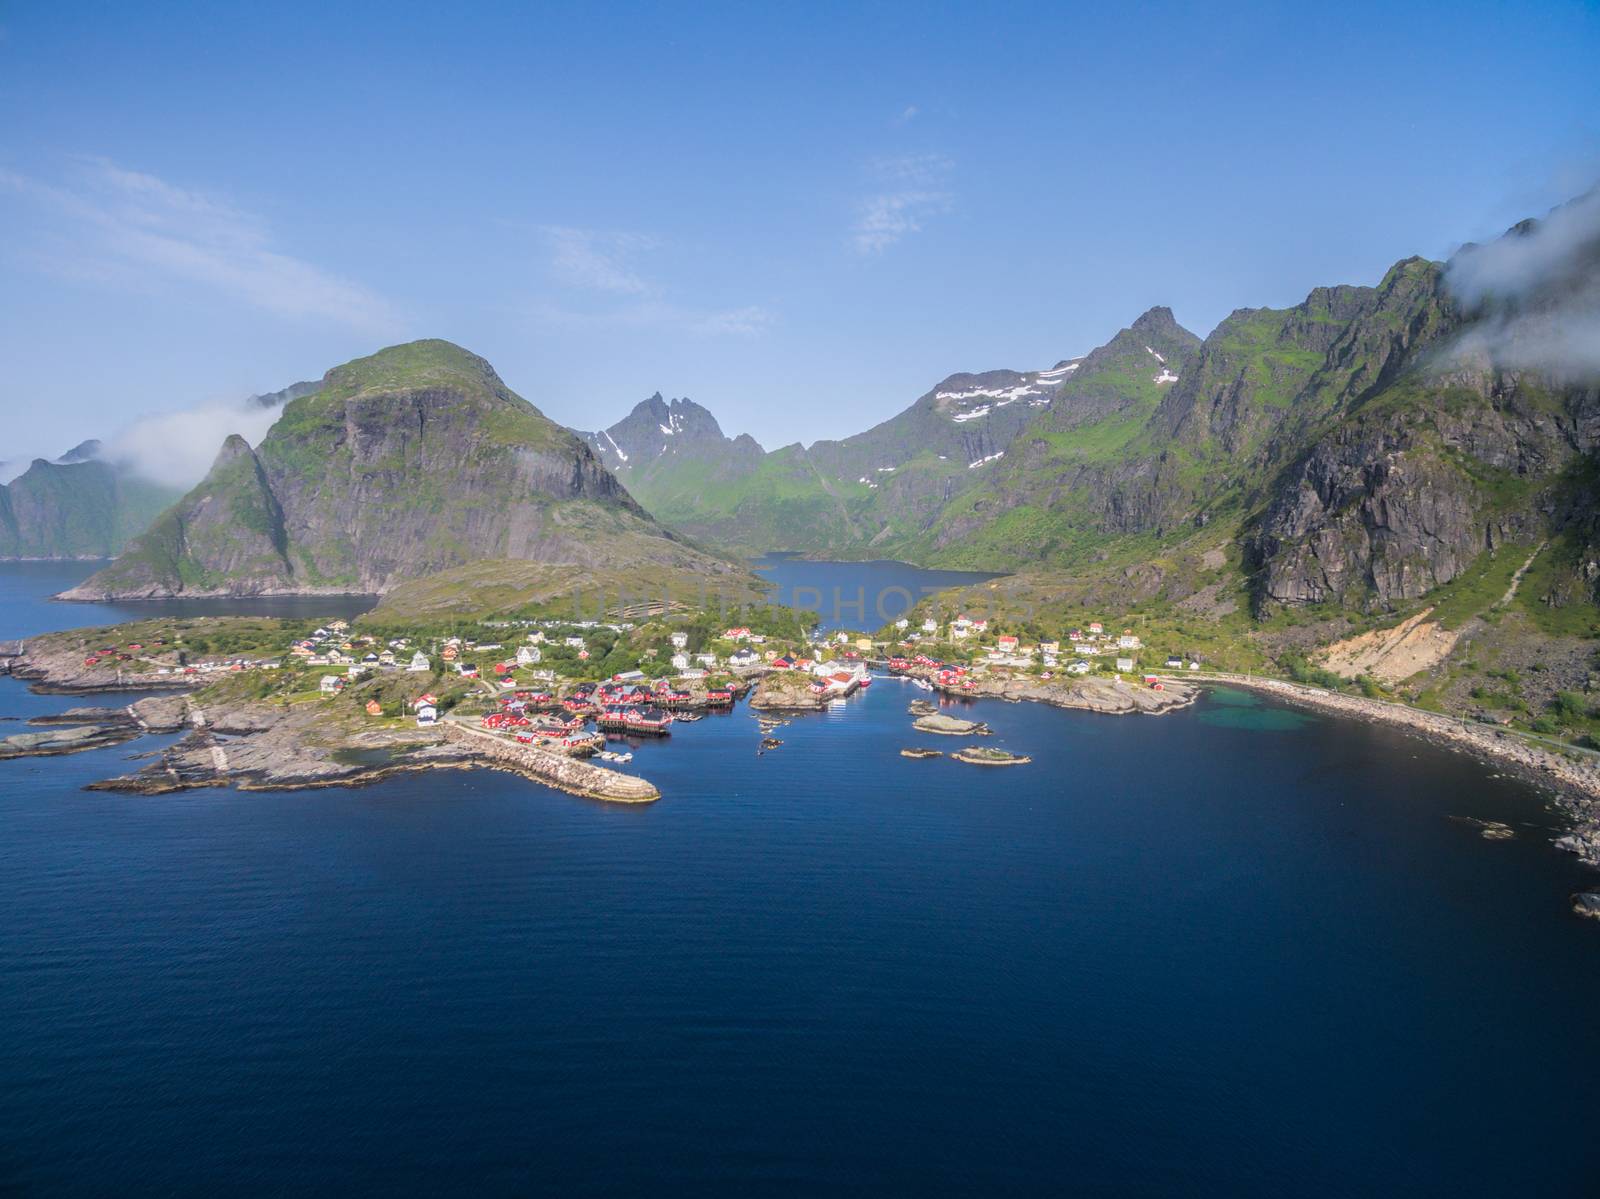 Aerial view of scenic fishing village A on Lofoten islands in Norway with traditional red fishing huts